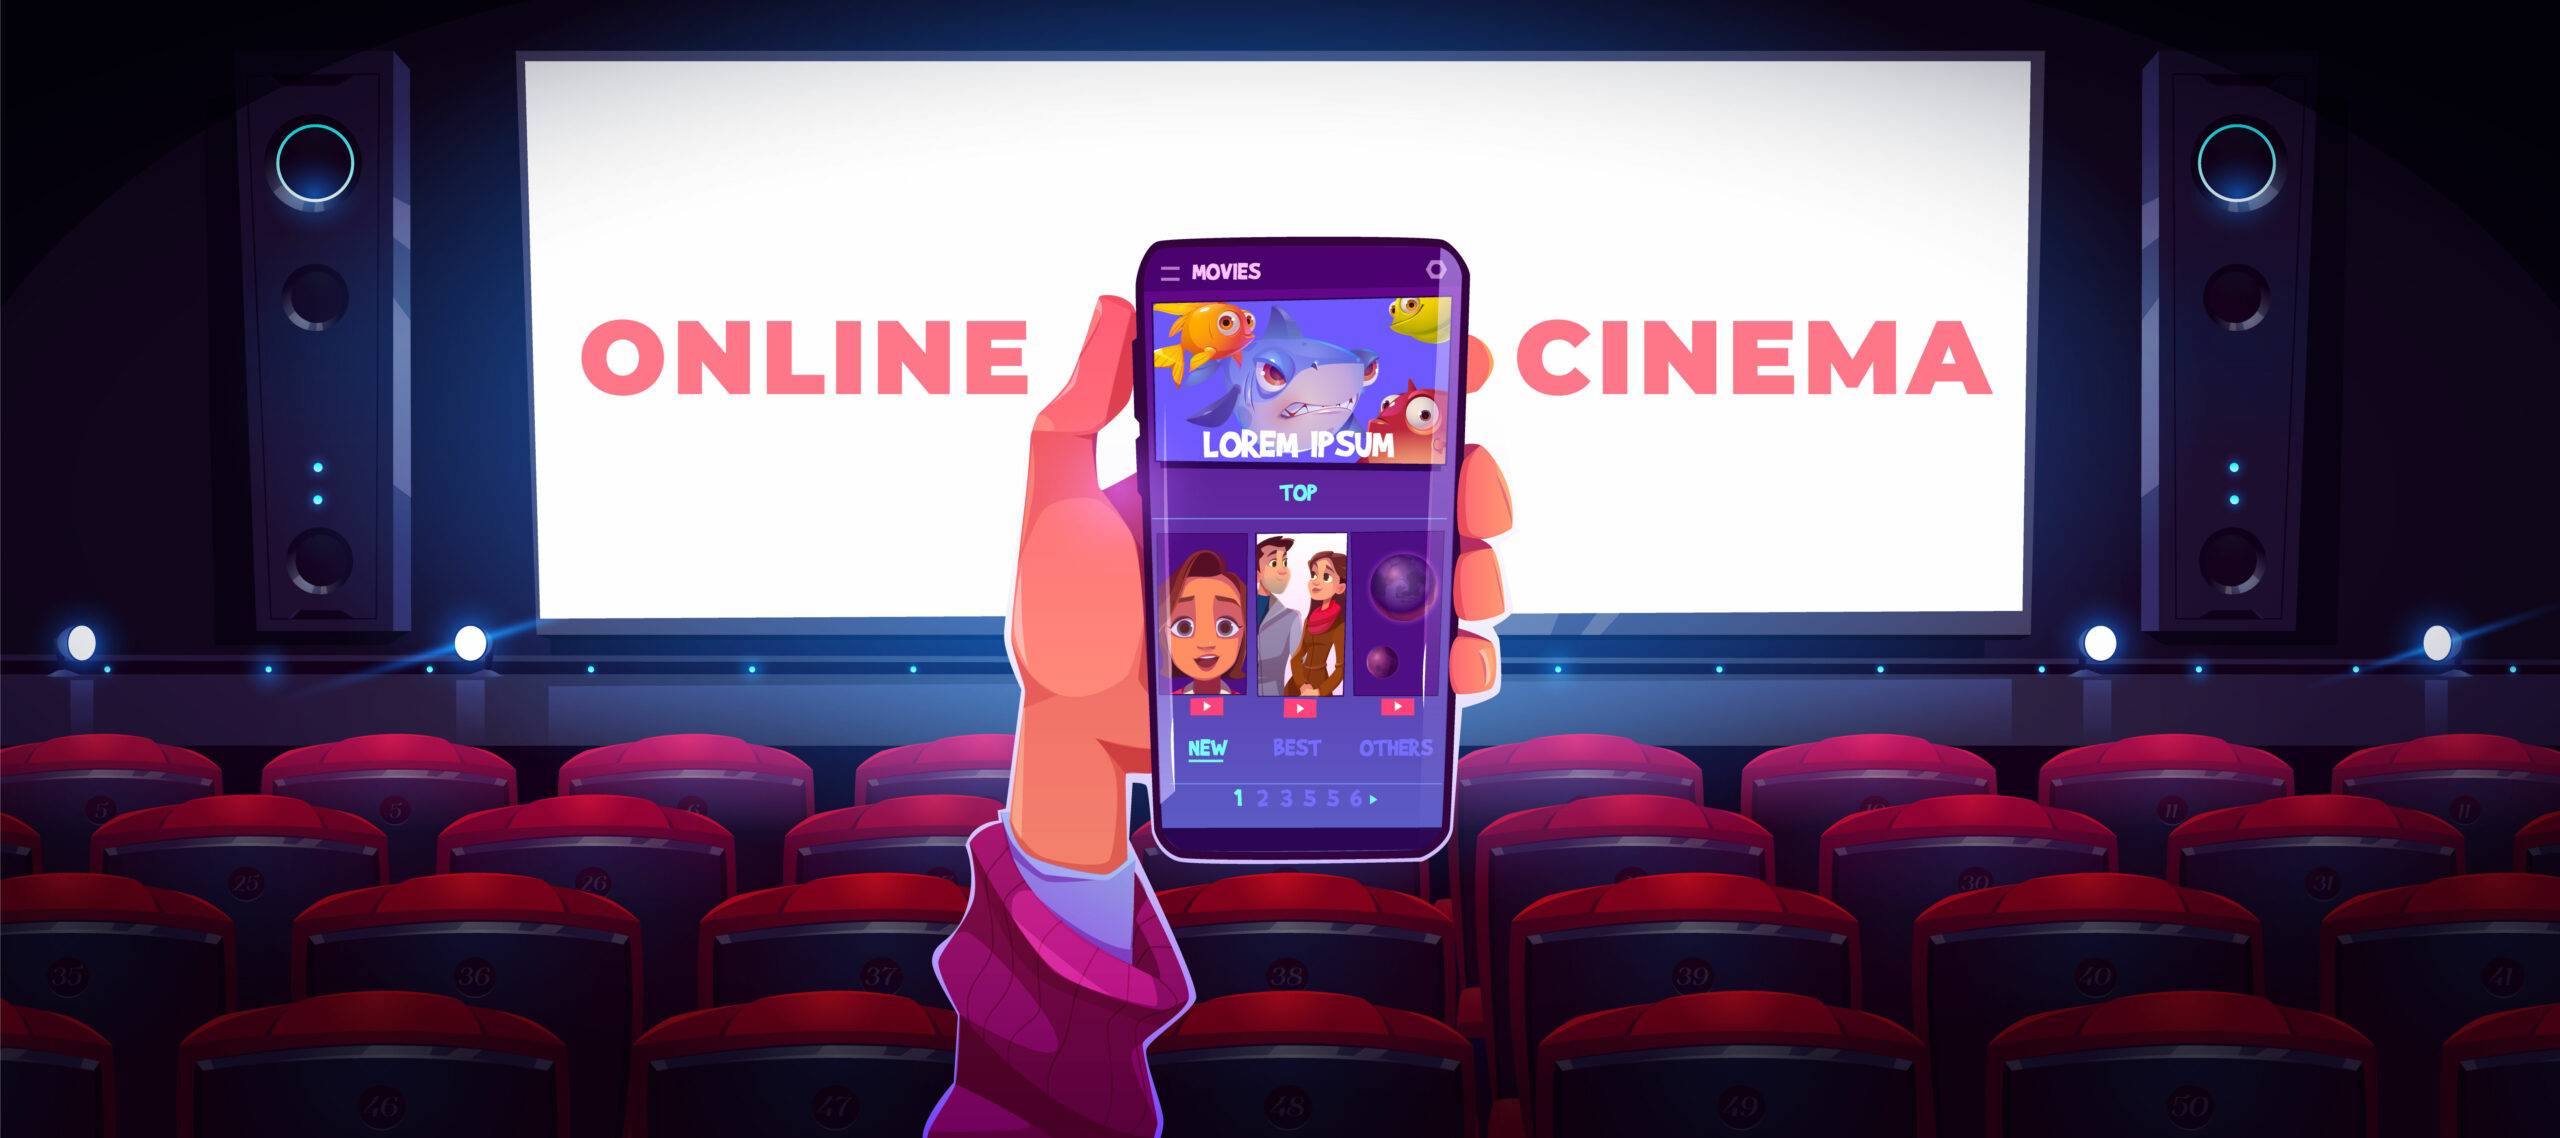 OTT Vs Theater: Which Is The Dominant Movie Watching Platform Today?